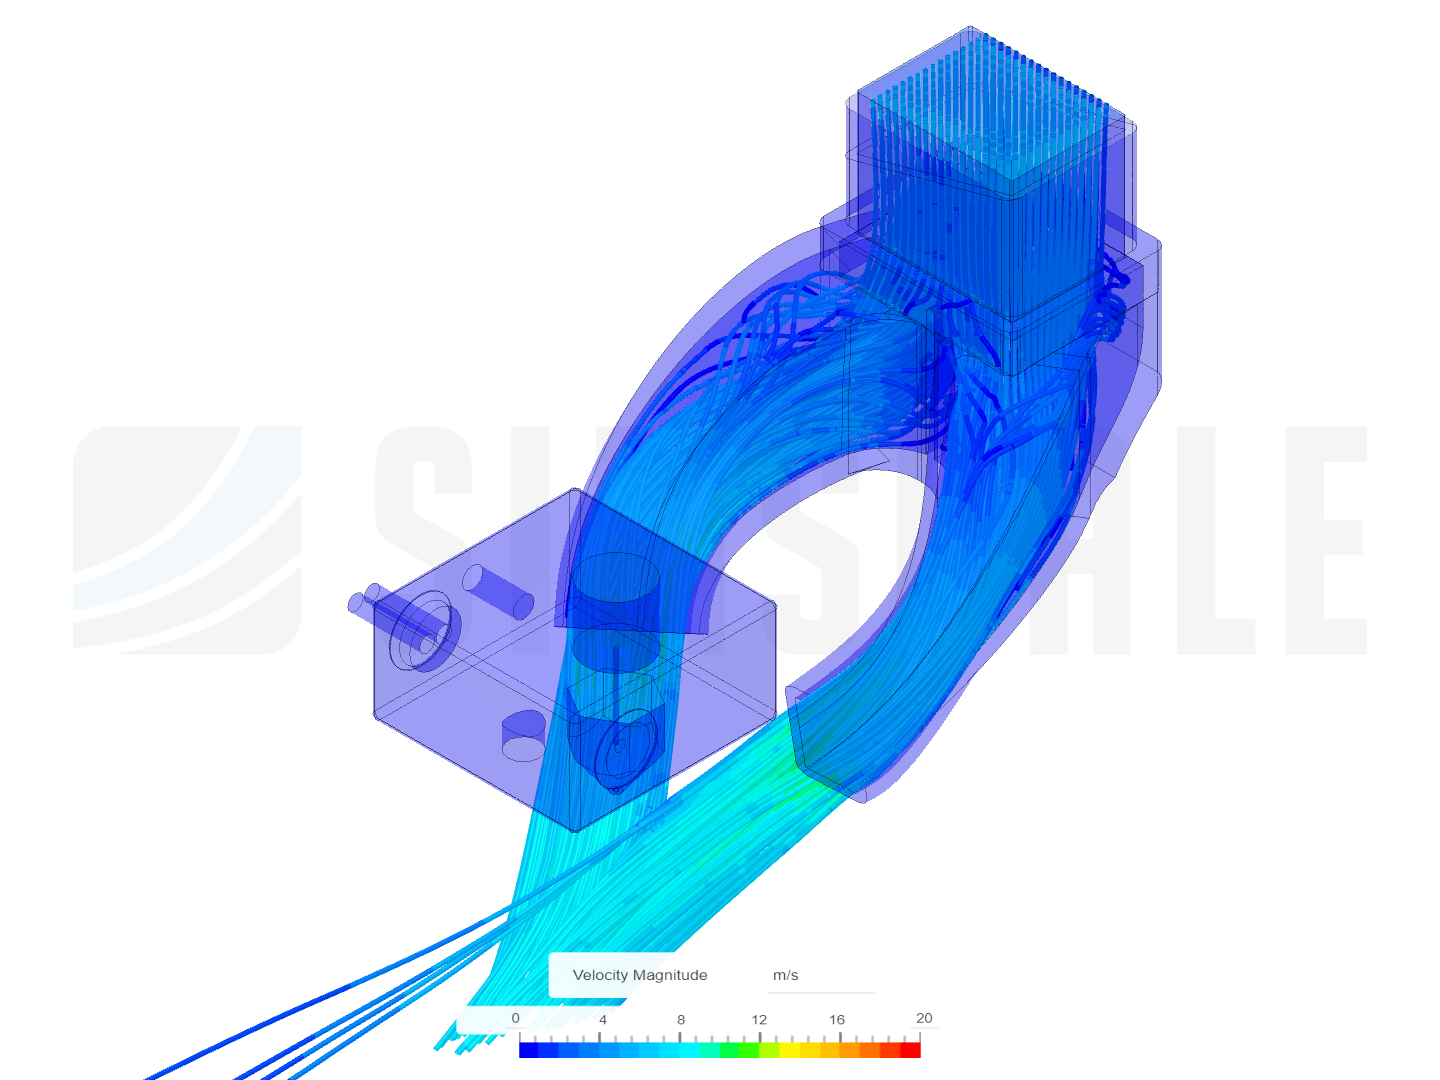 Cooling Duct Study image